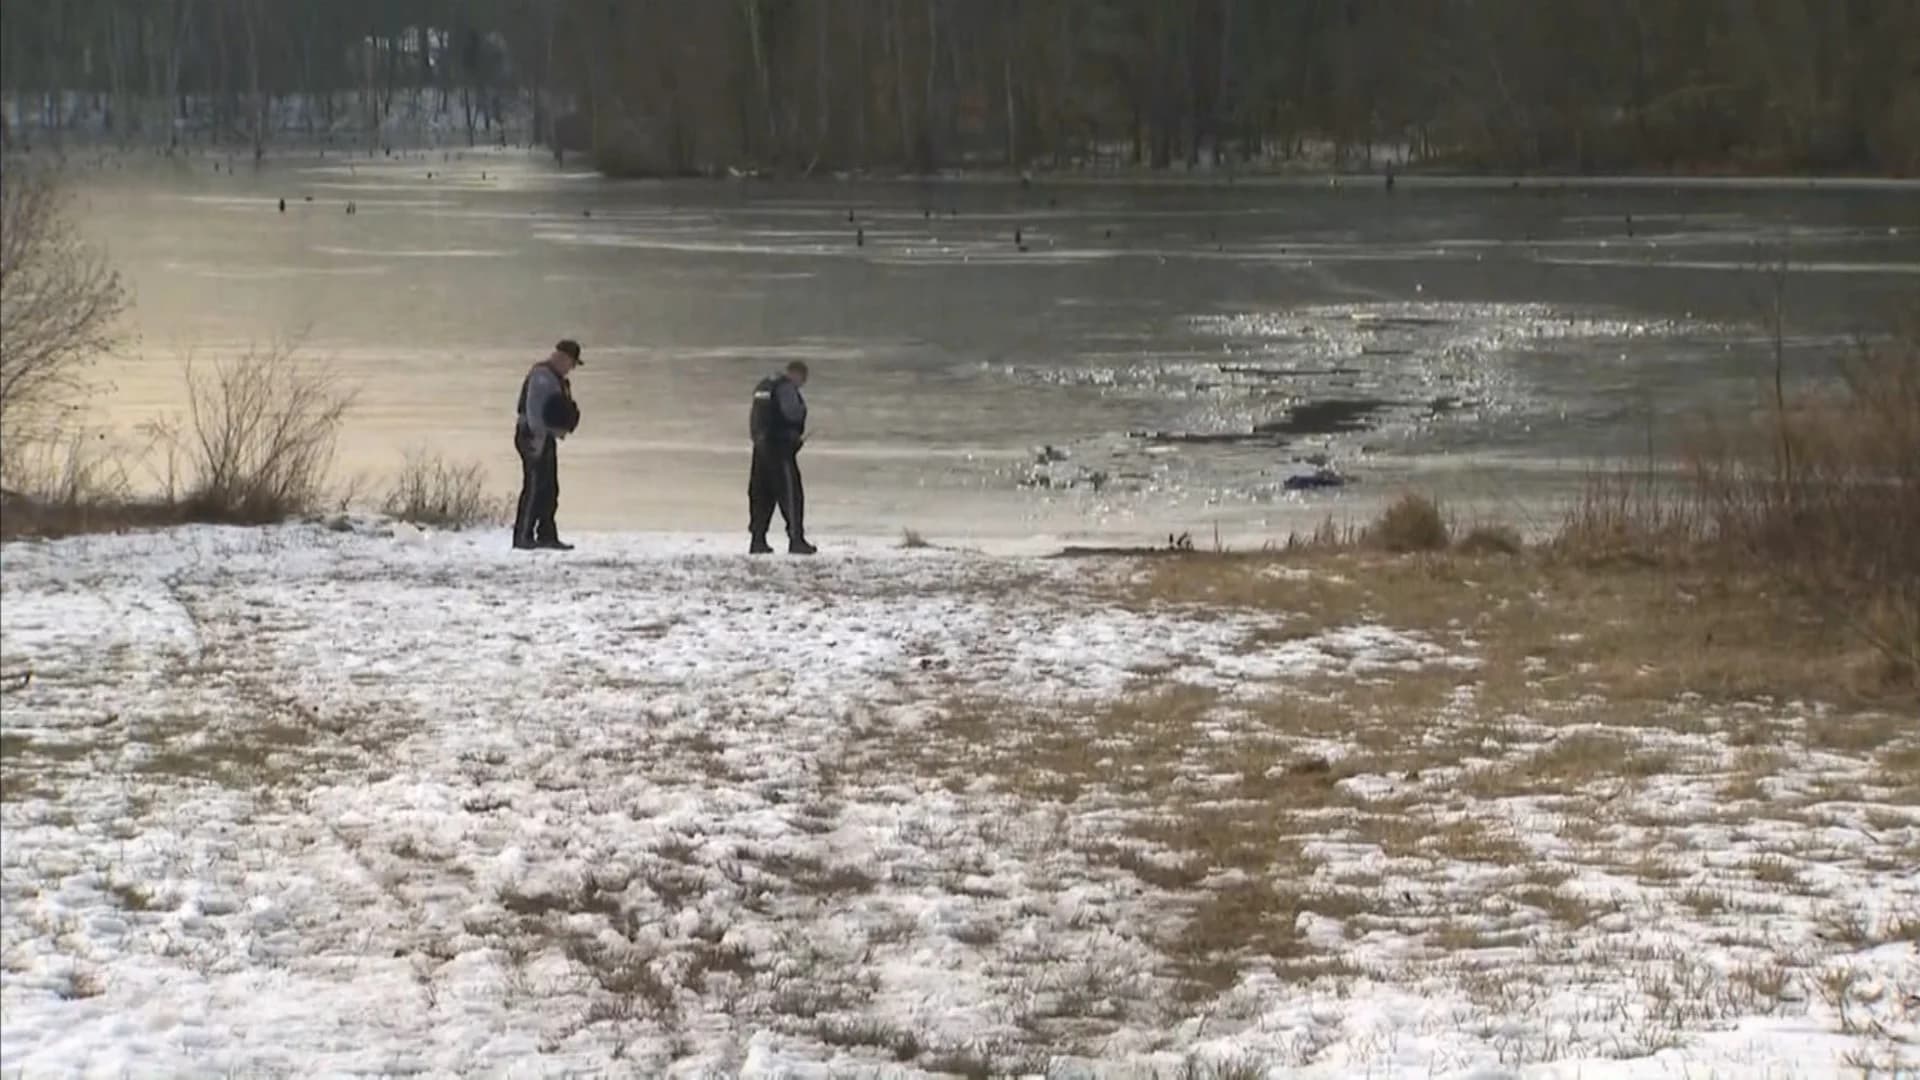 1st responders rescue person who fell through ice in Passaic County